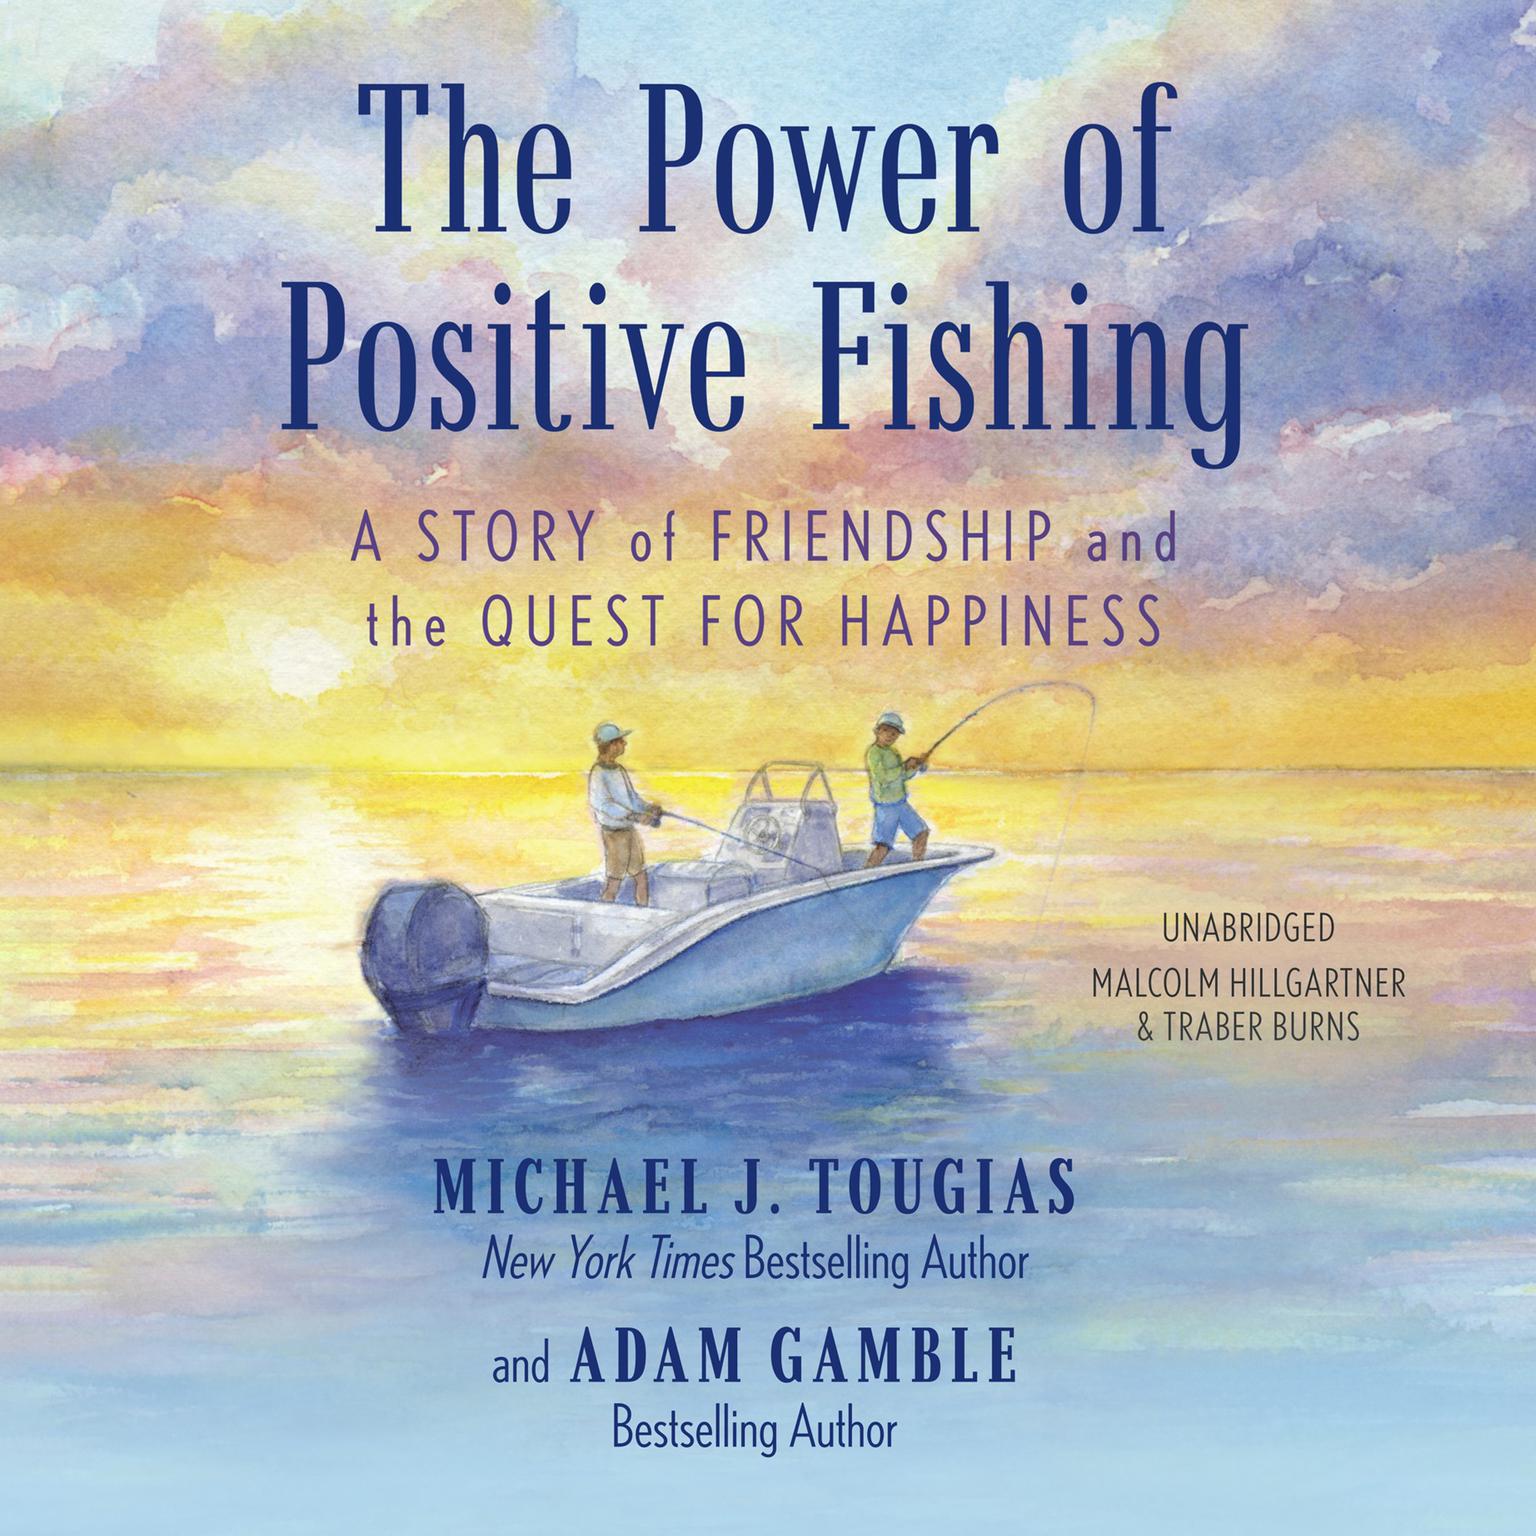 The Power of Positive Fishing: A Story of Friendship and the Quest for Happiness Audiobook, by Michael J. Tougias